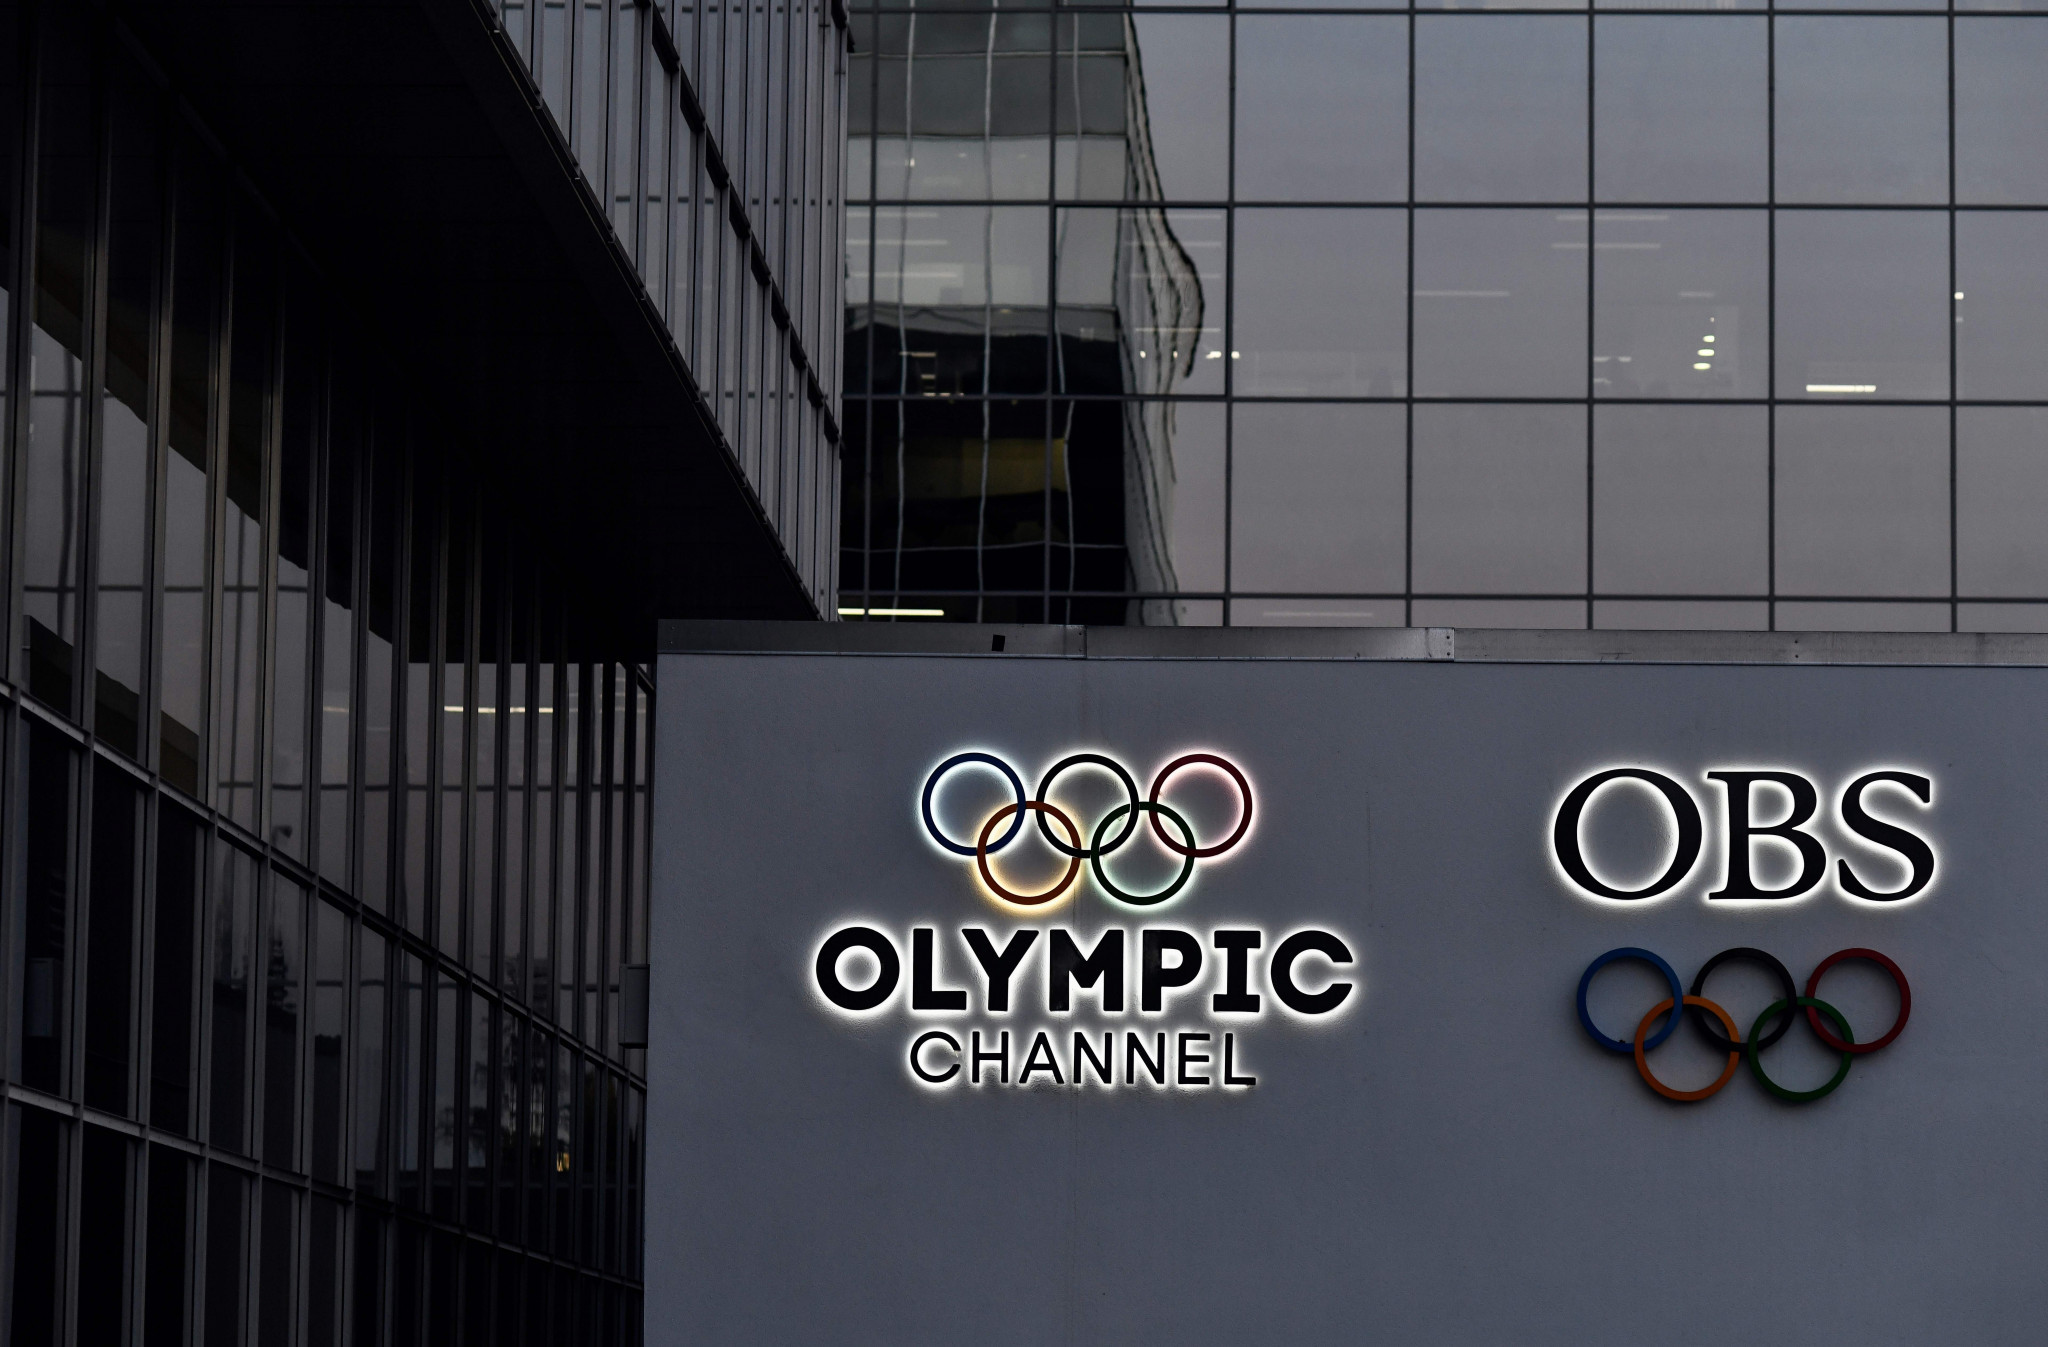 Olympic Channel reveals live streaming schedule for Lausanne 2020